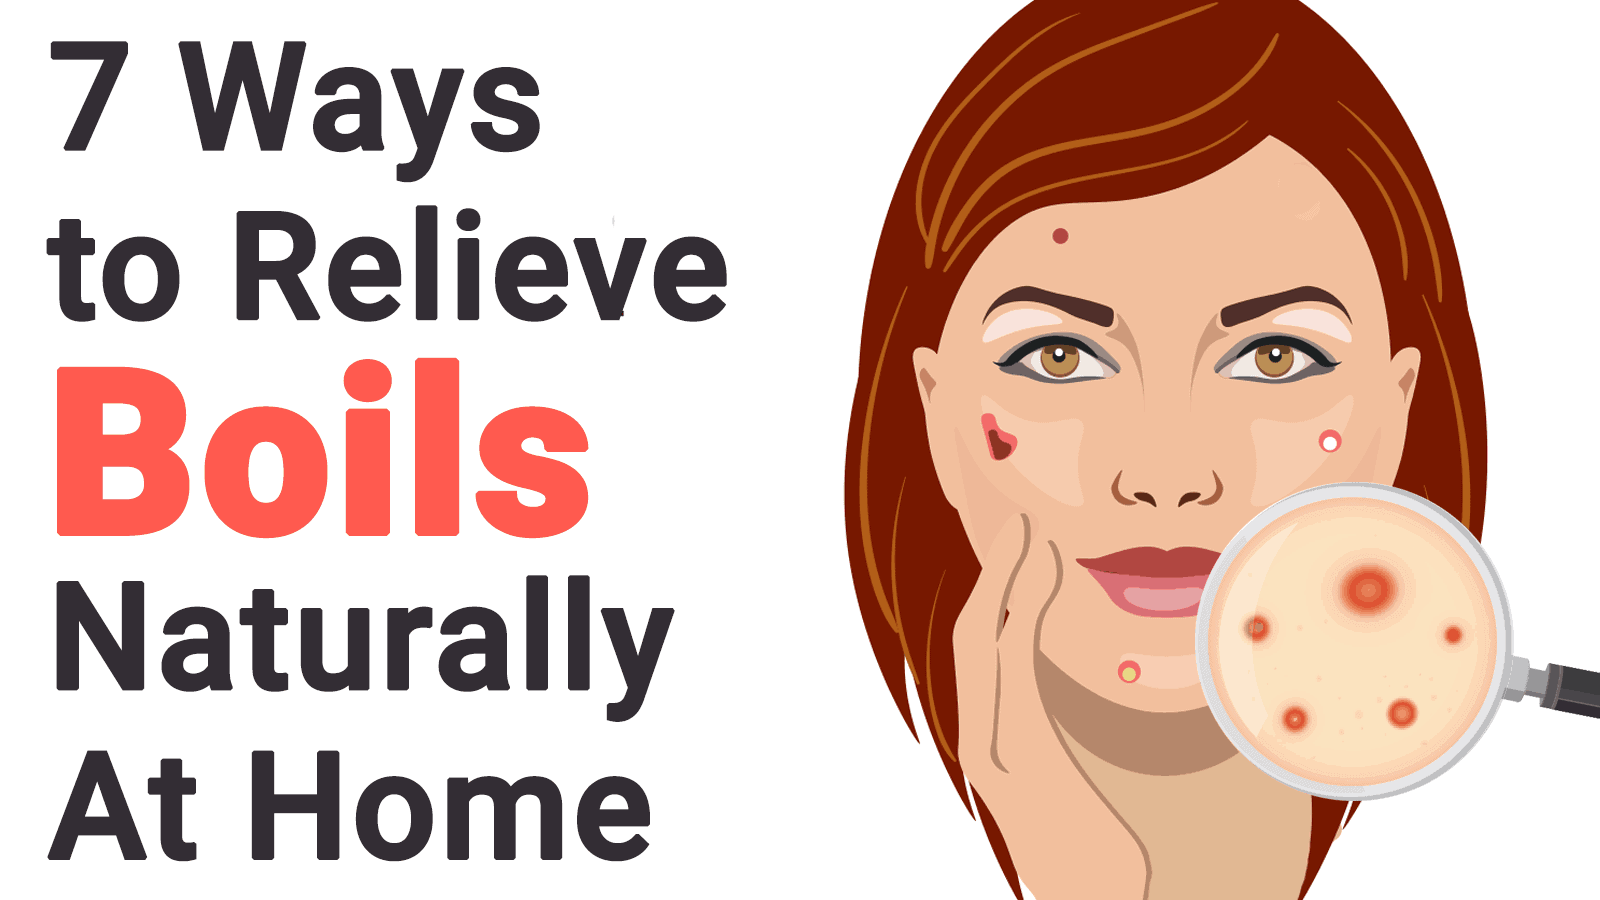 7 Ways to Relieve Boils Naturally At Home